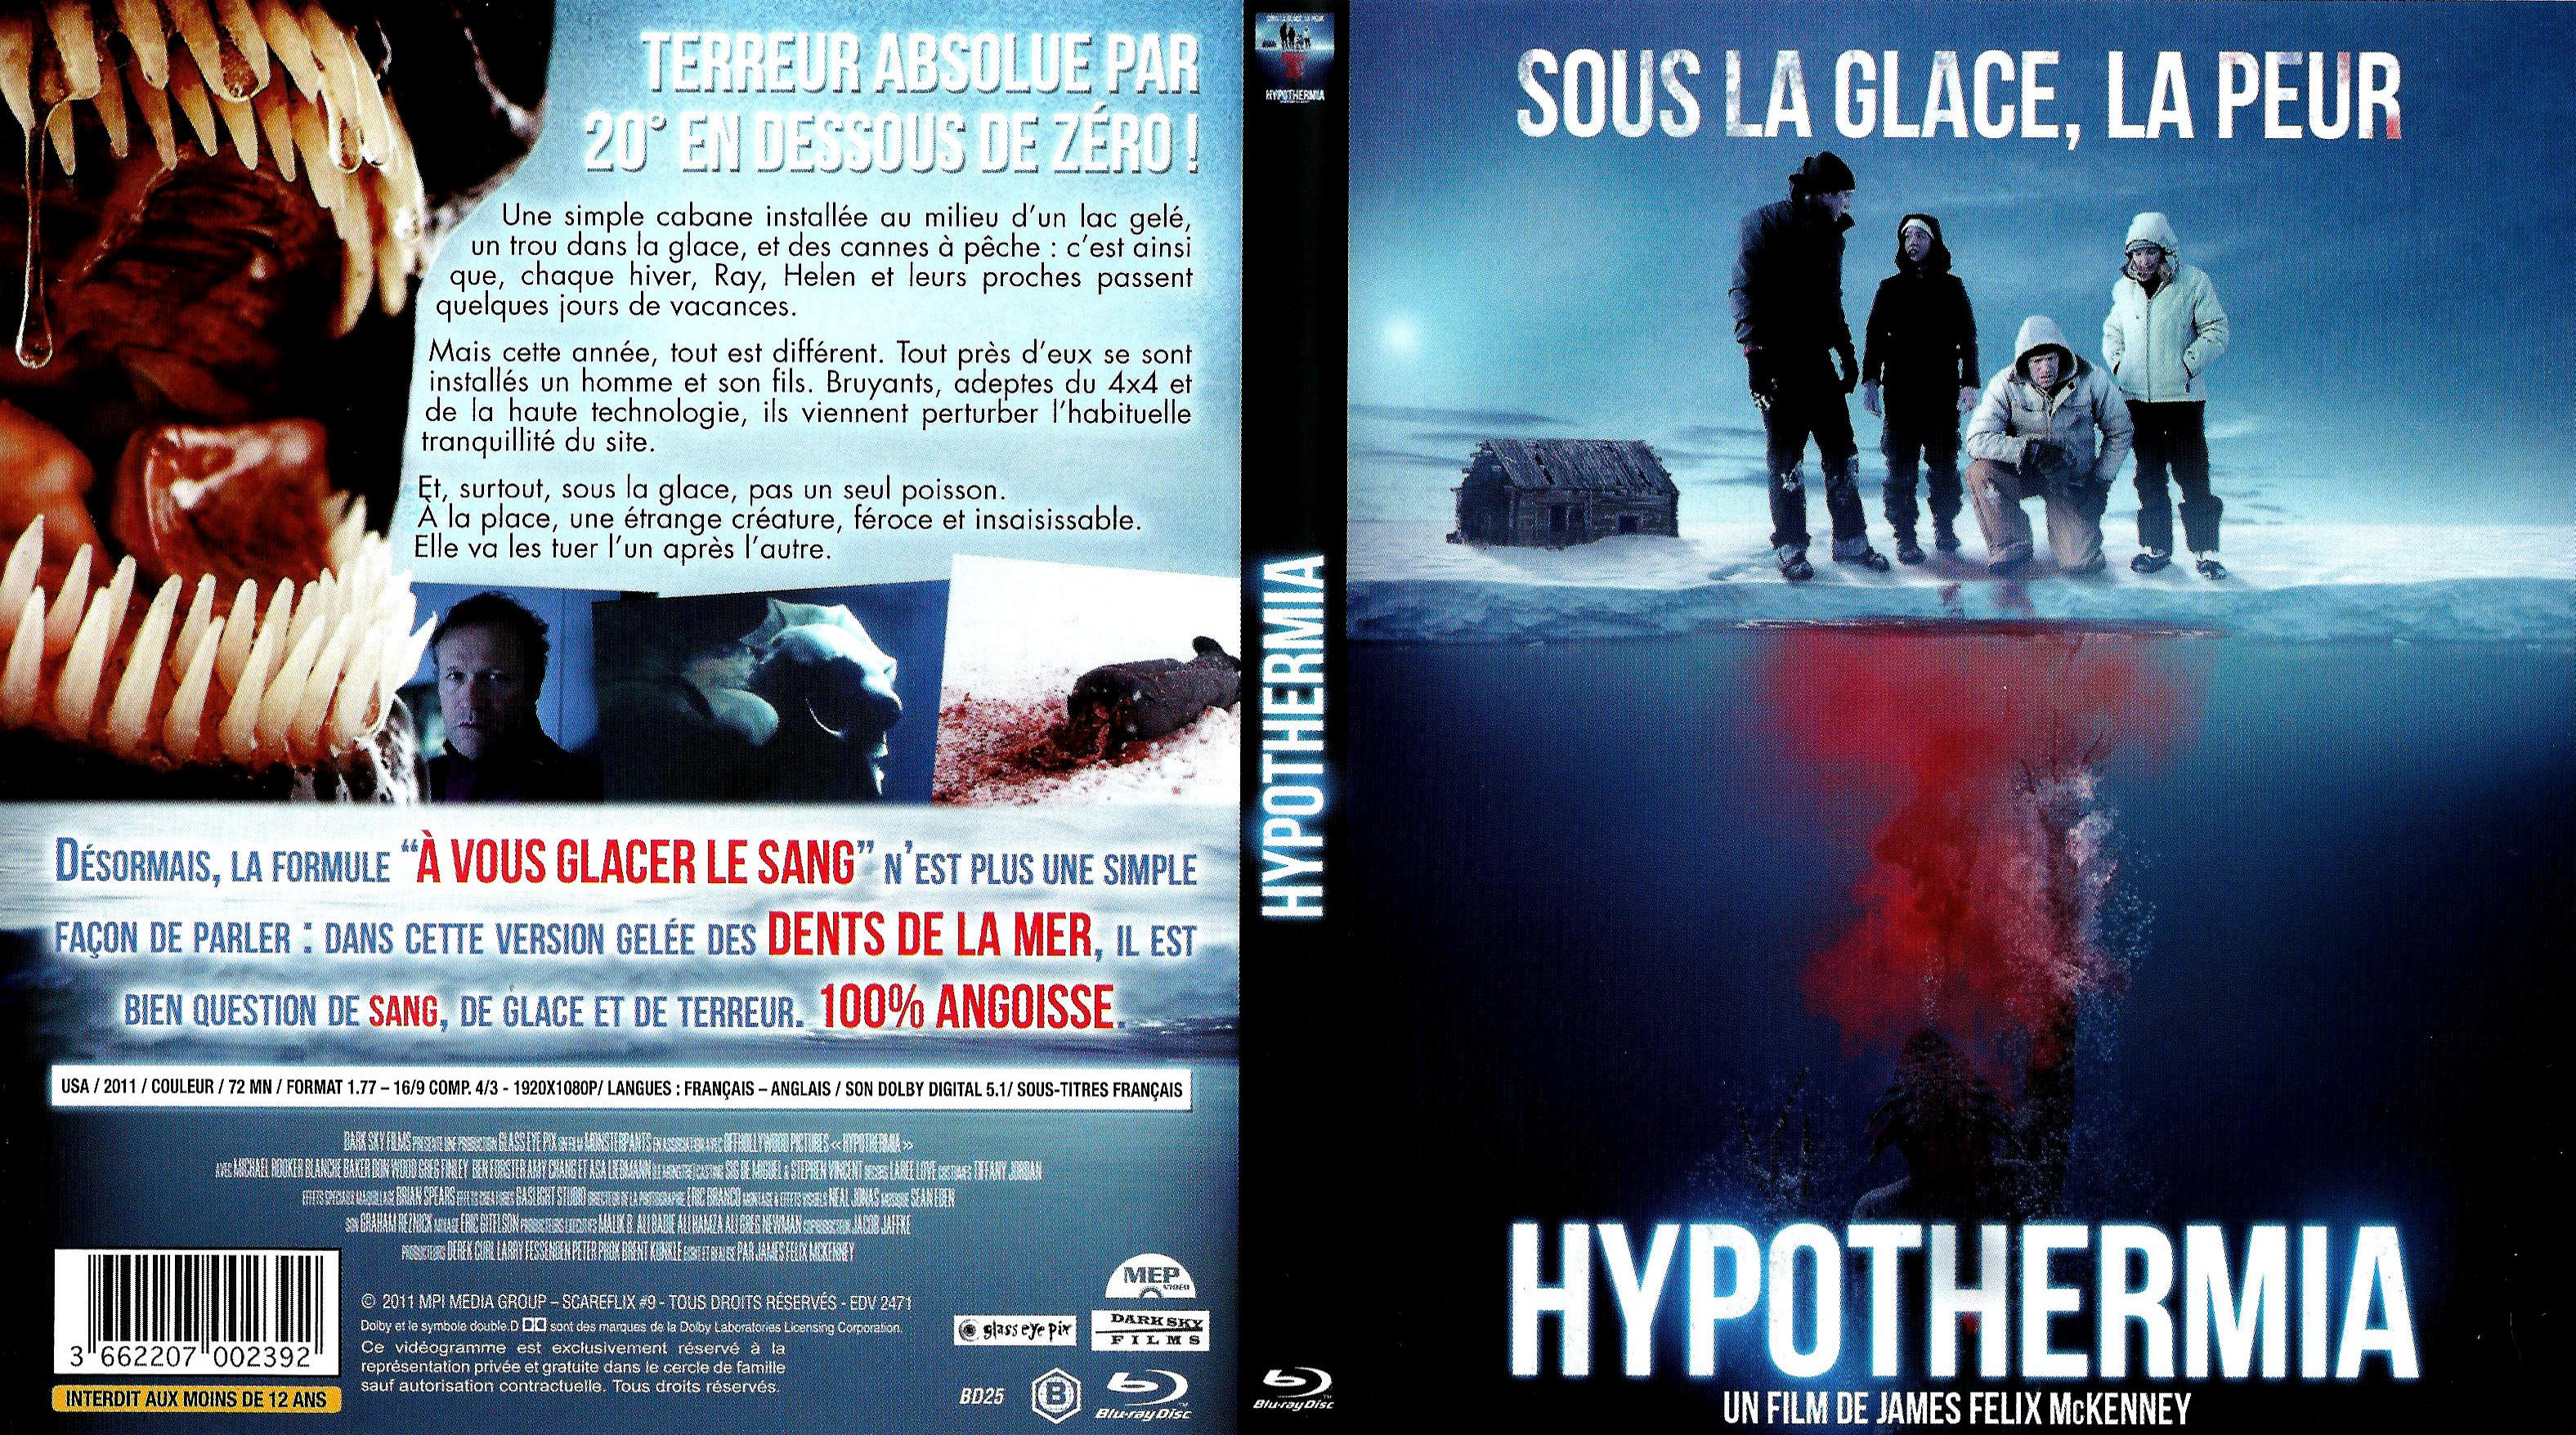 Jaquette DVD Hypothermia (BLU-RAY)